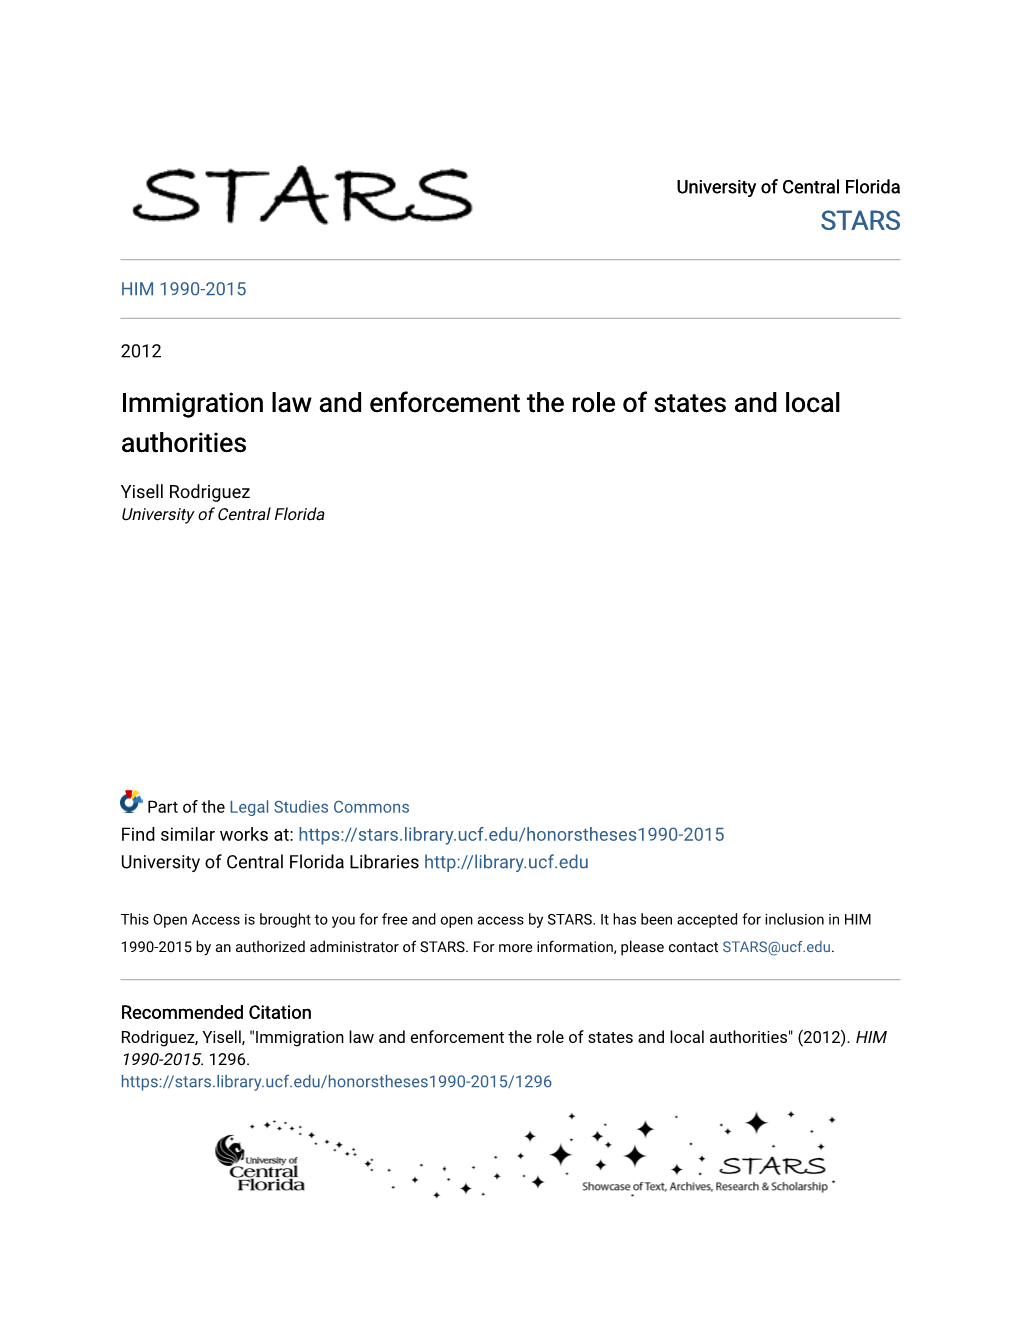 Immigration Law and Enforcement the Role of States and Local Authorities